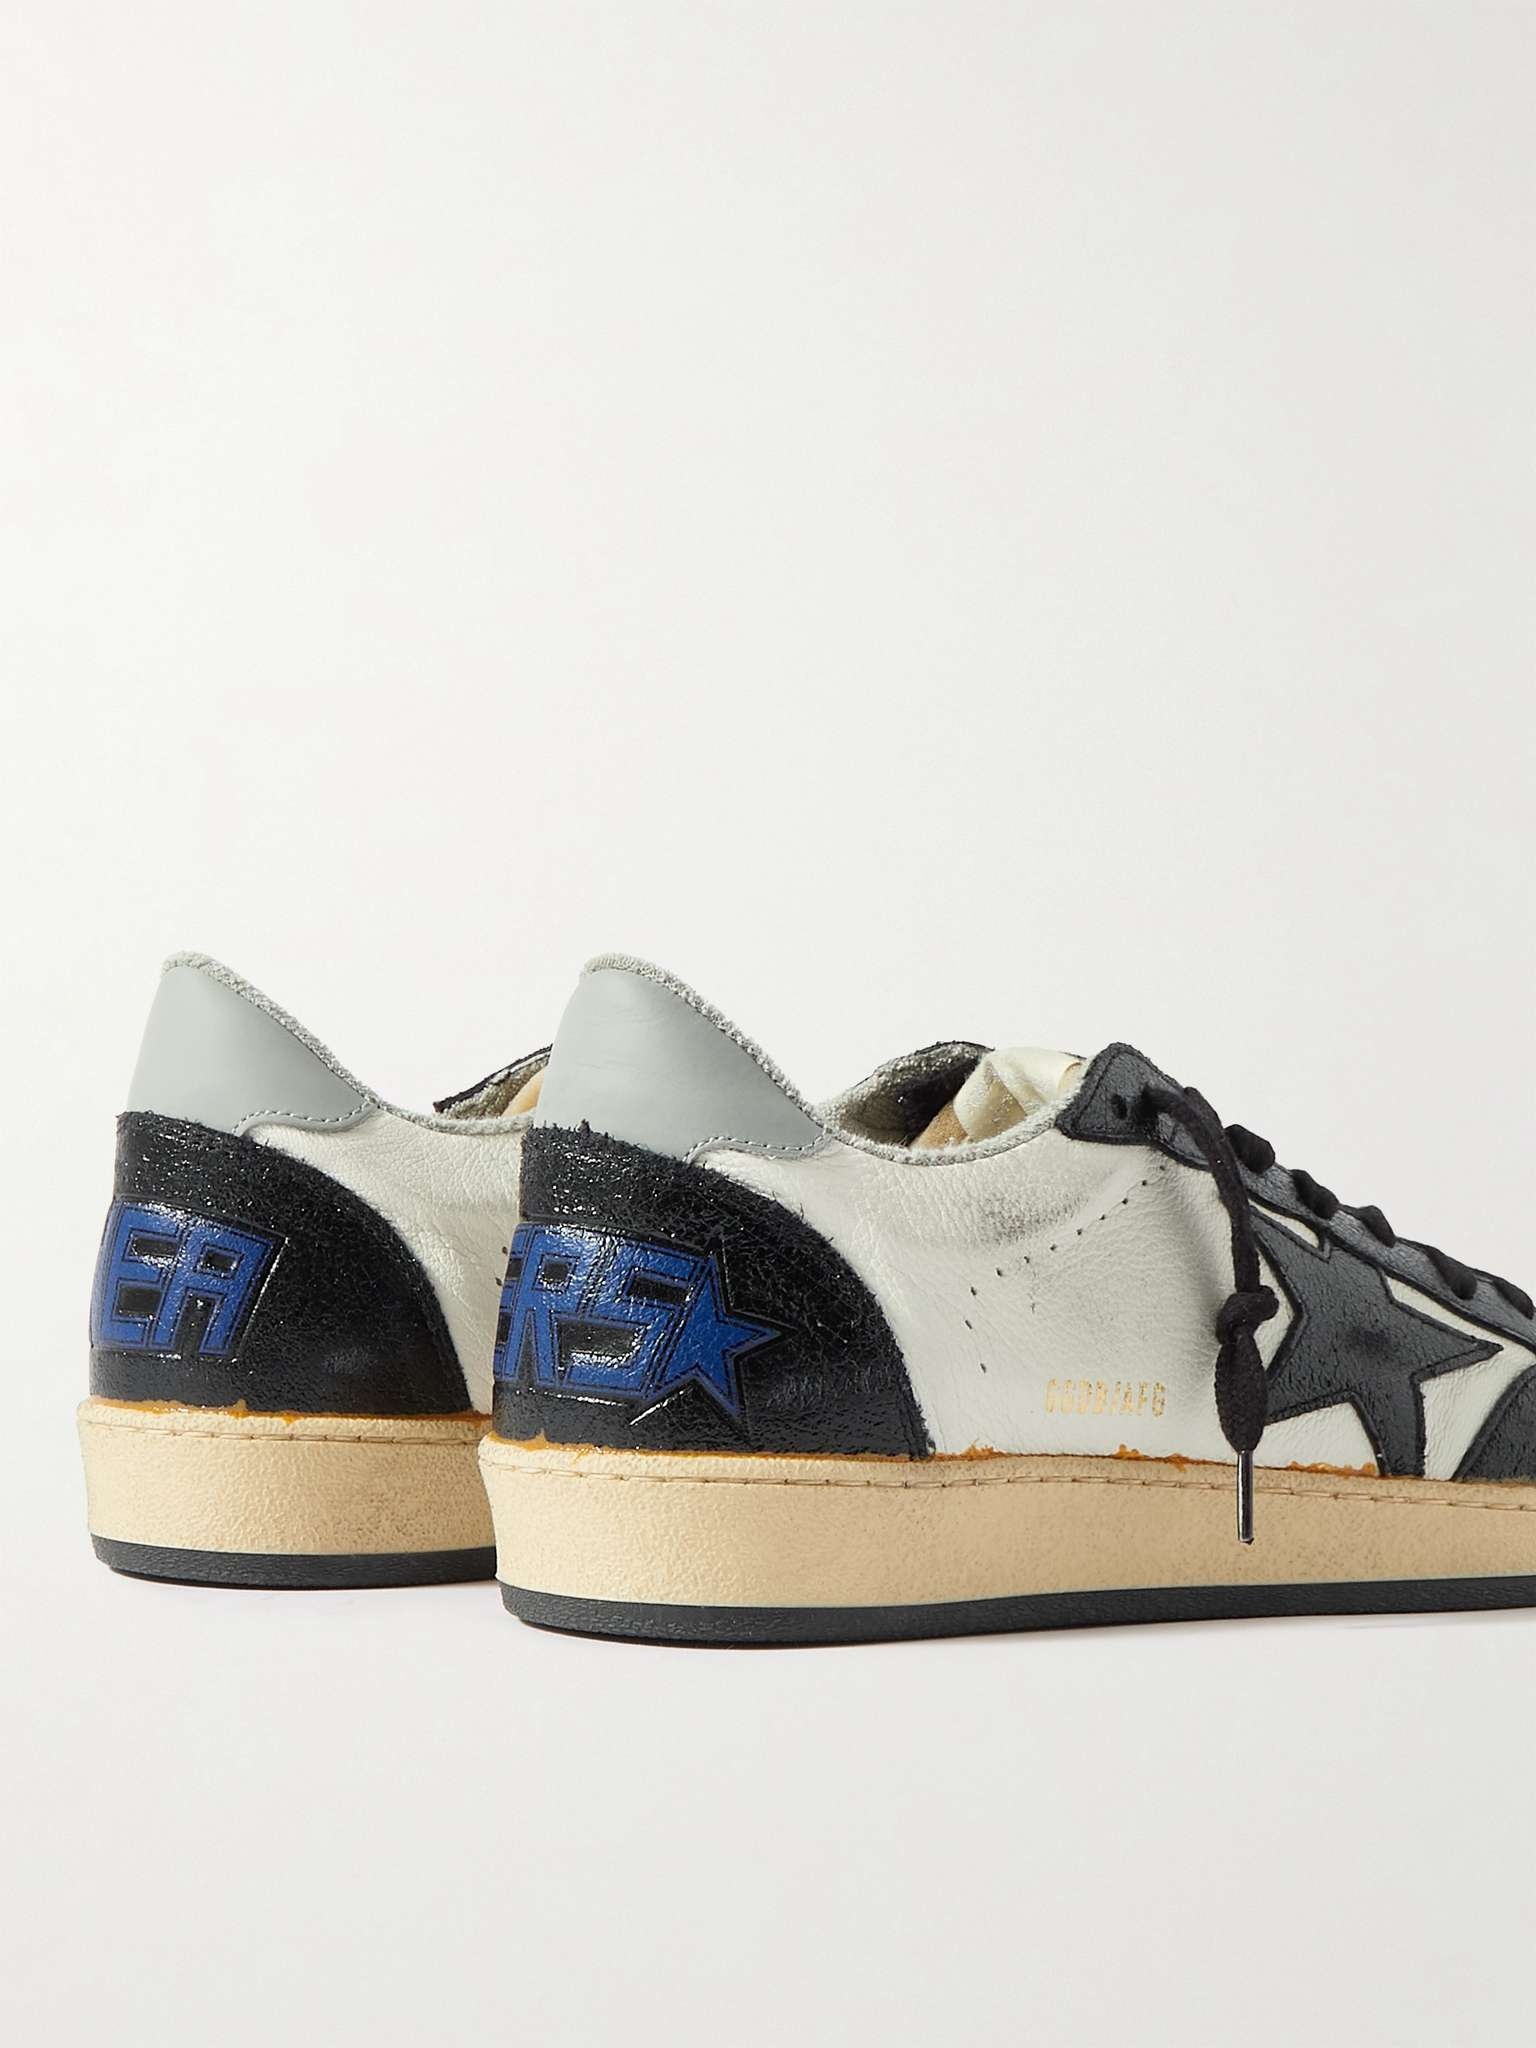 Ball Star Distressed Leather and Shell Sneakers - 5